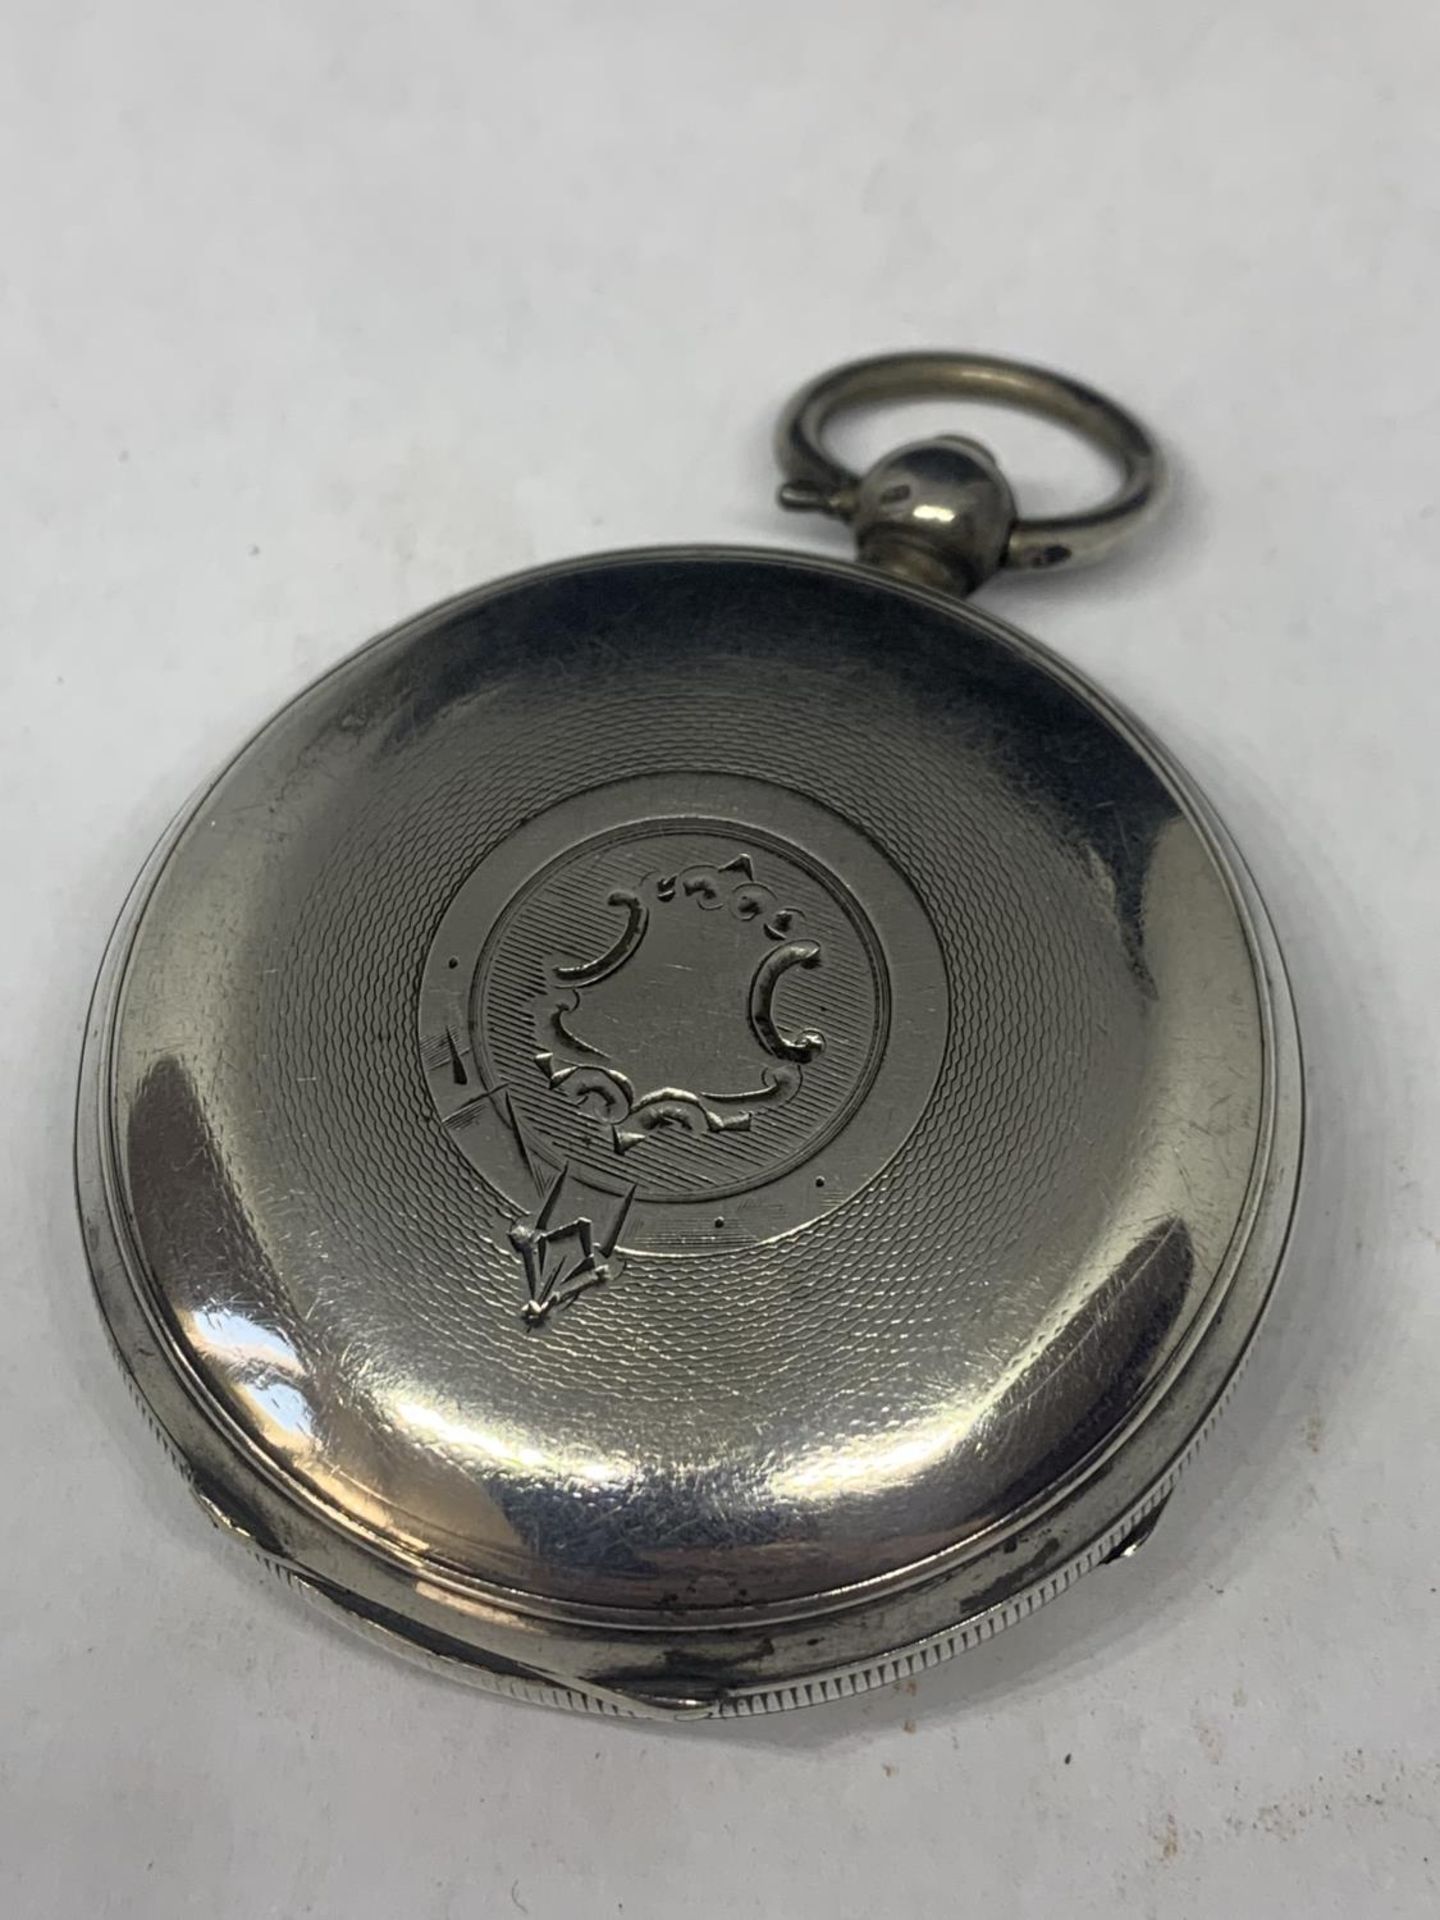 A CHESTER HALLMARKED SILVER ENGLISH LEVER ?IMPROVED PATENT? POCKET WATCH - Image 3 of 5